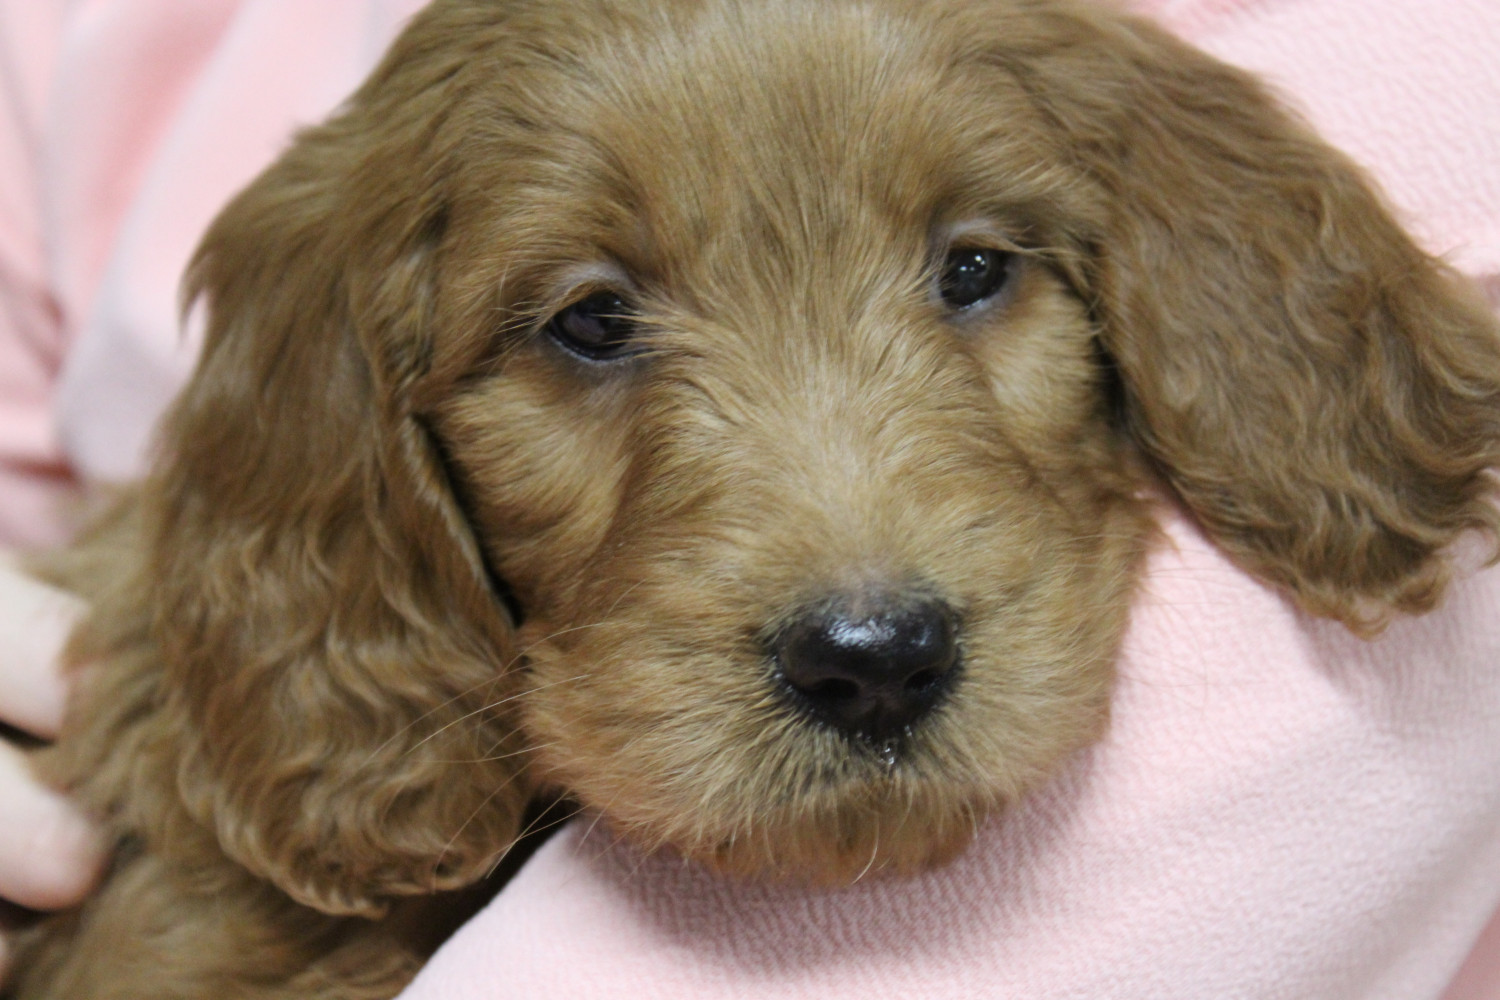 35 Top Images Goldendoodle Puppies For Sale Price : Miniature Goldendoodle Puppies For Sale | Puppy Adoption ...